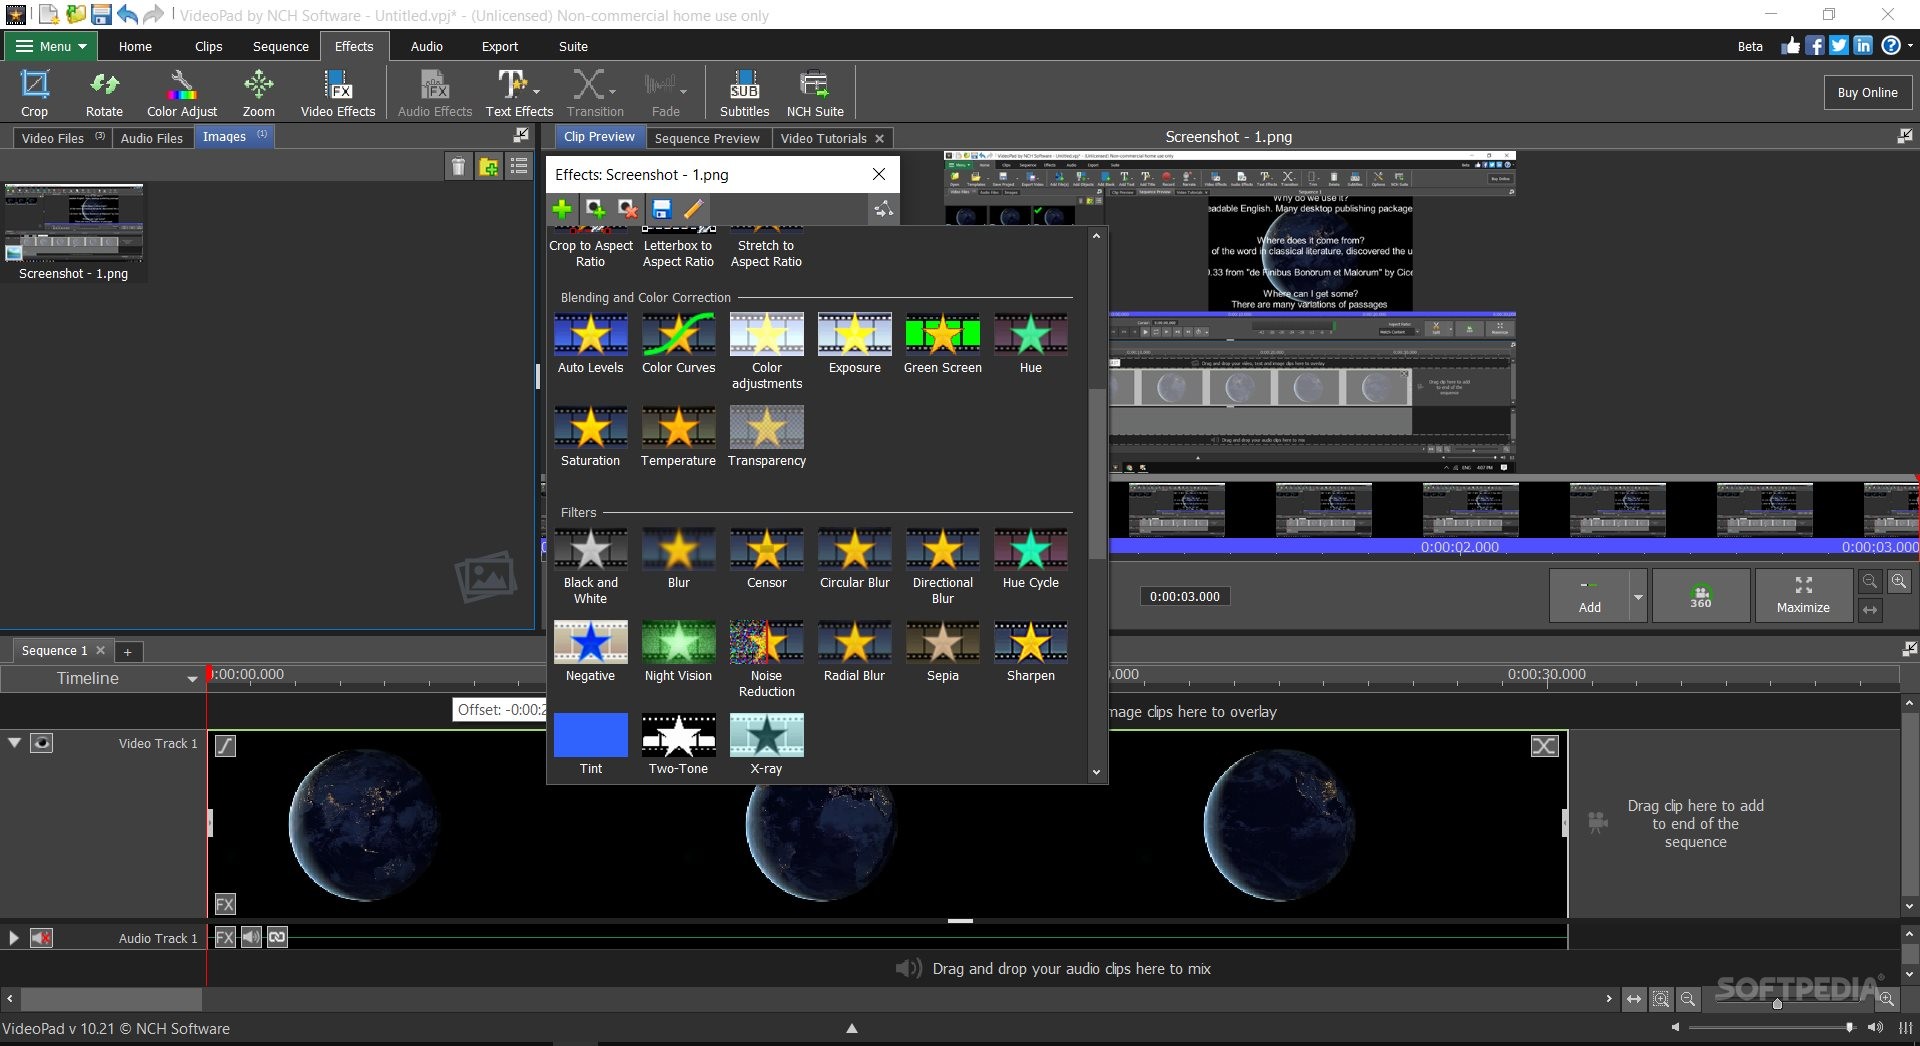 videopad video editor free download